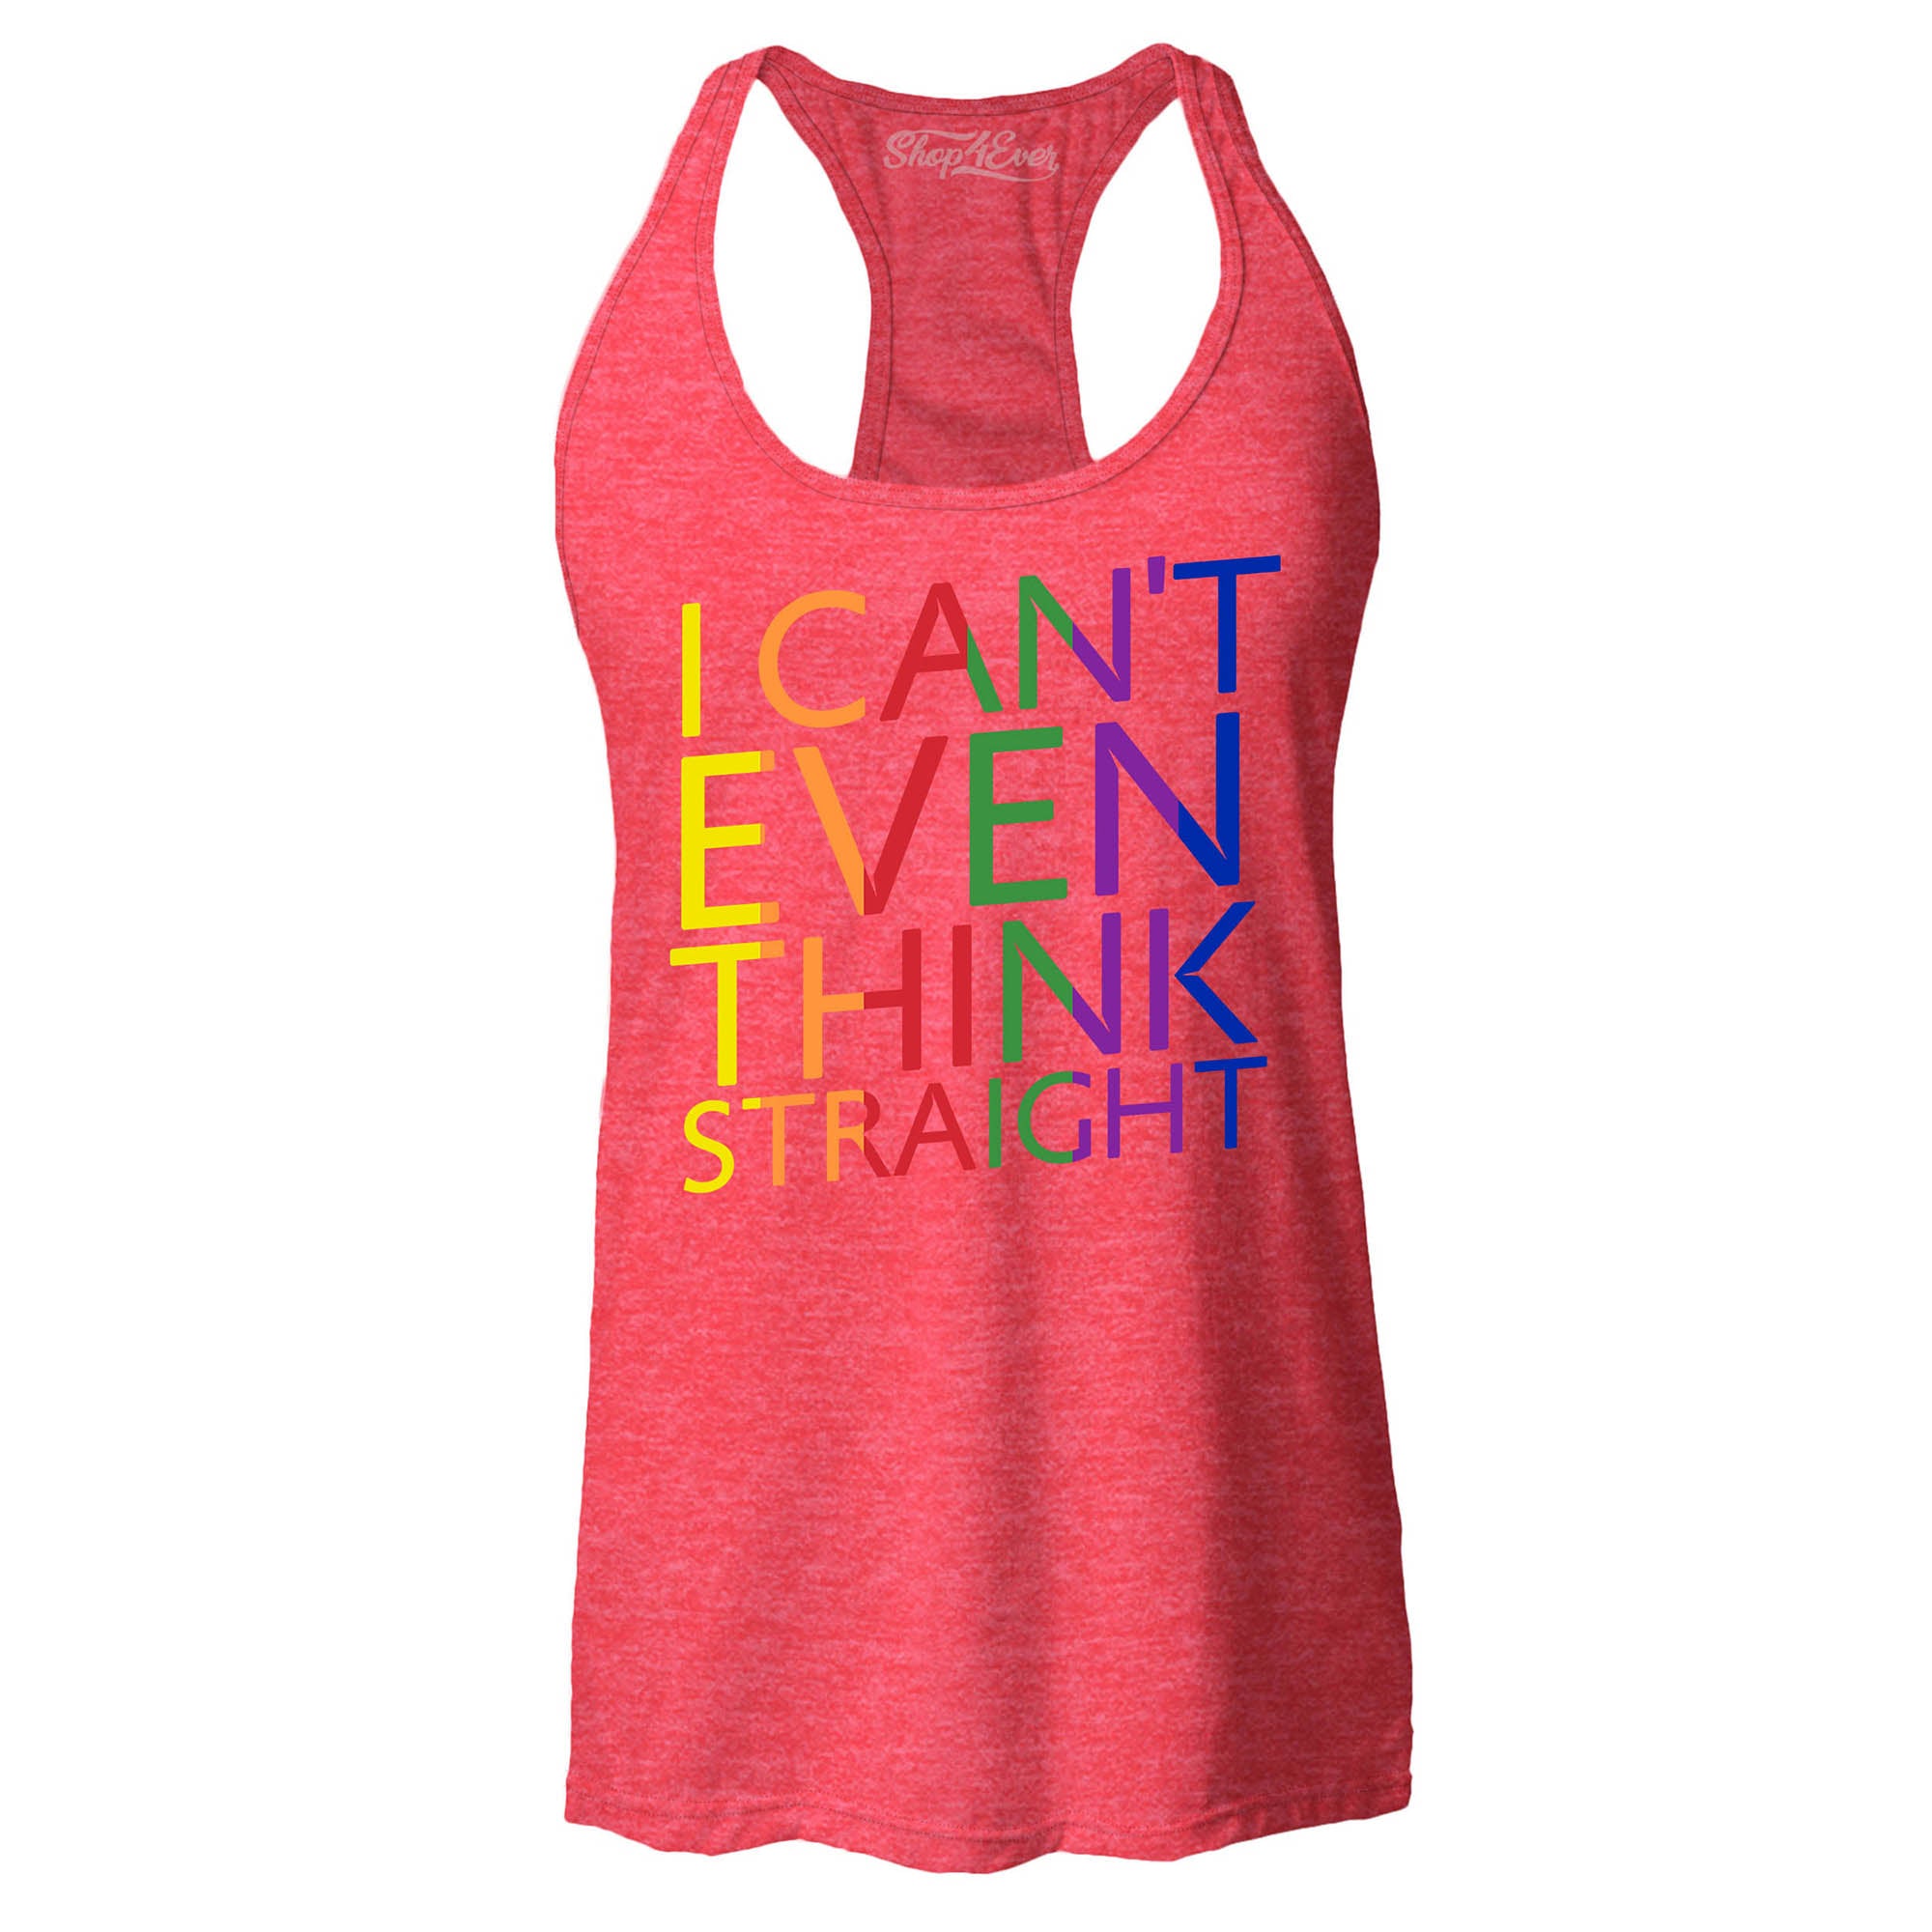 I Can't Even Think Straight ~ Gay Pride Women's Racerback Tank Top Slim Fit